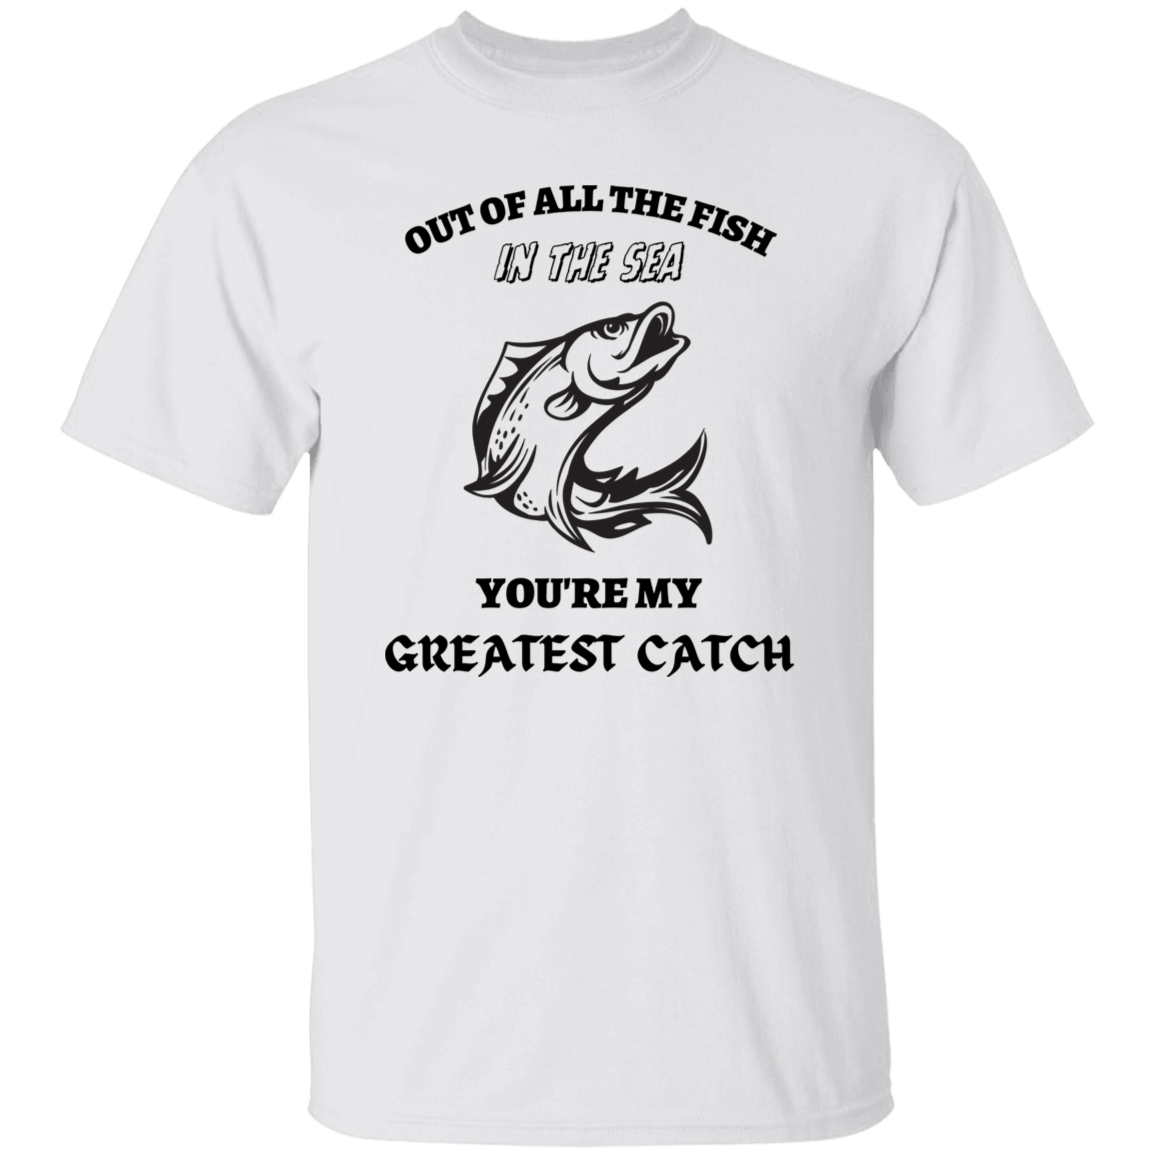 You're My Greatest Catch T-Shirt